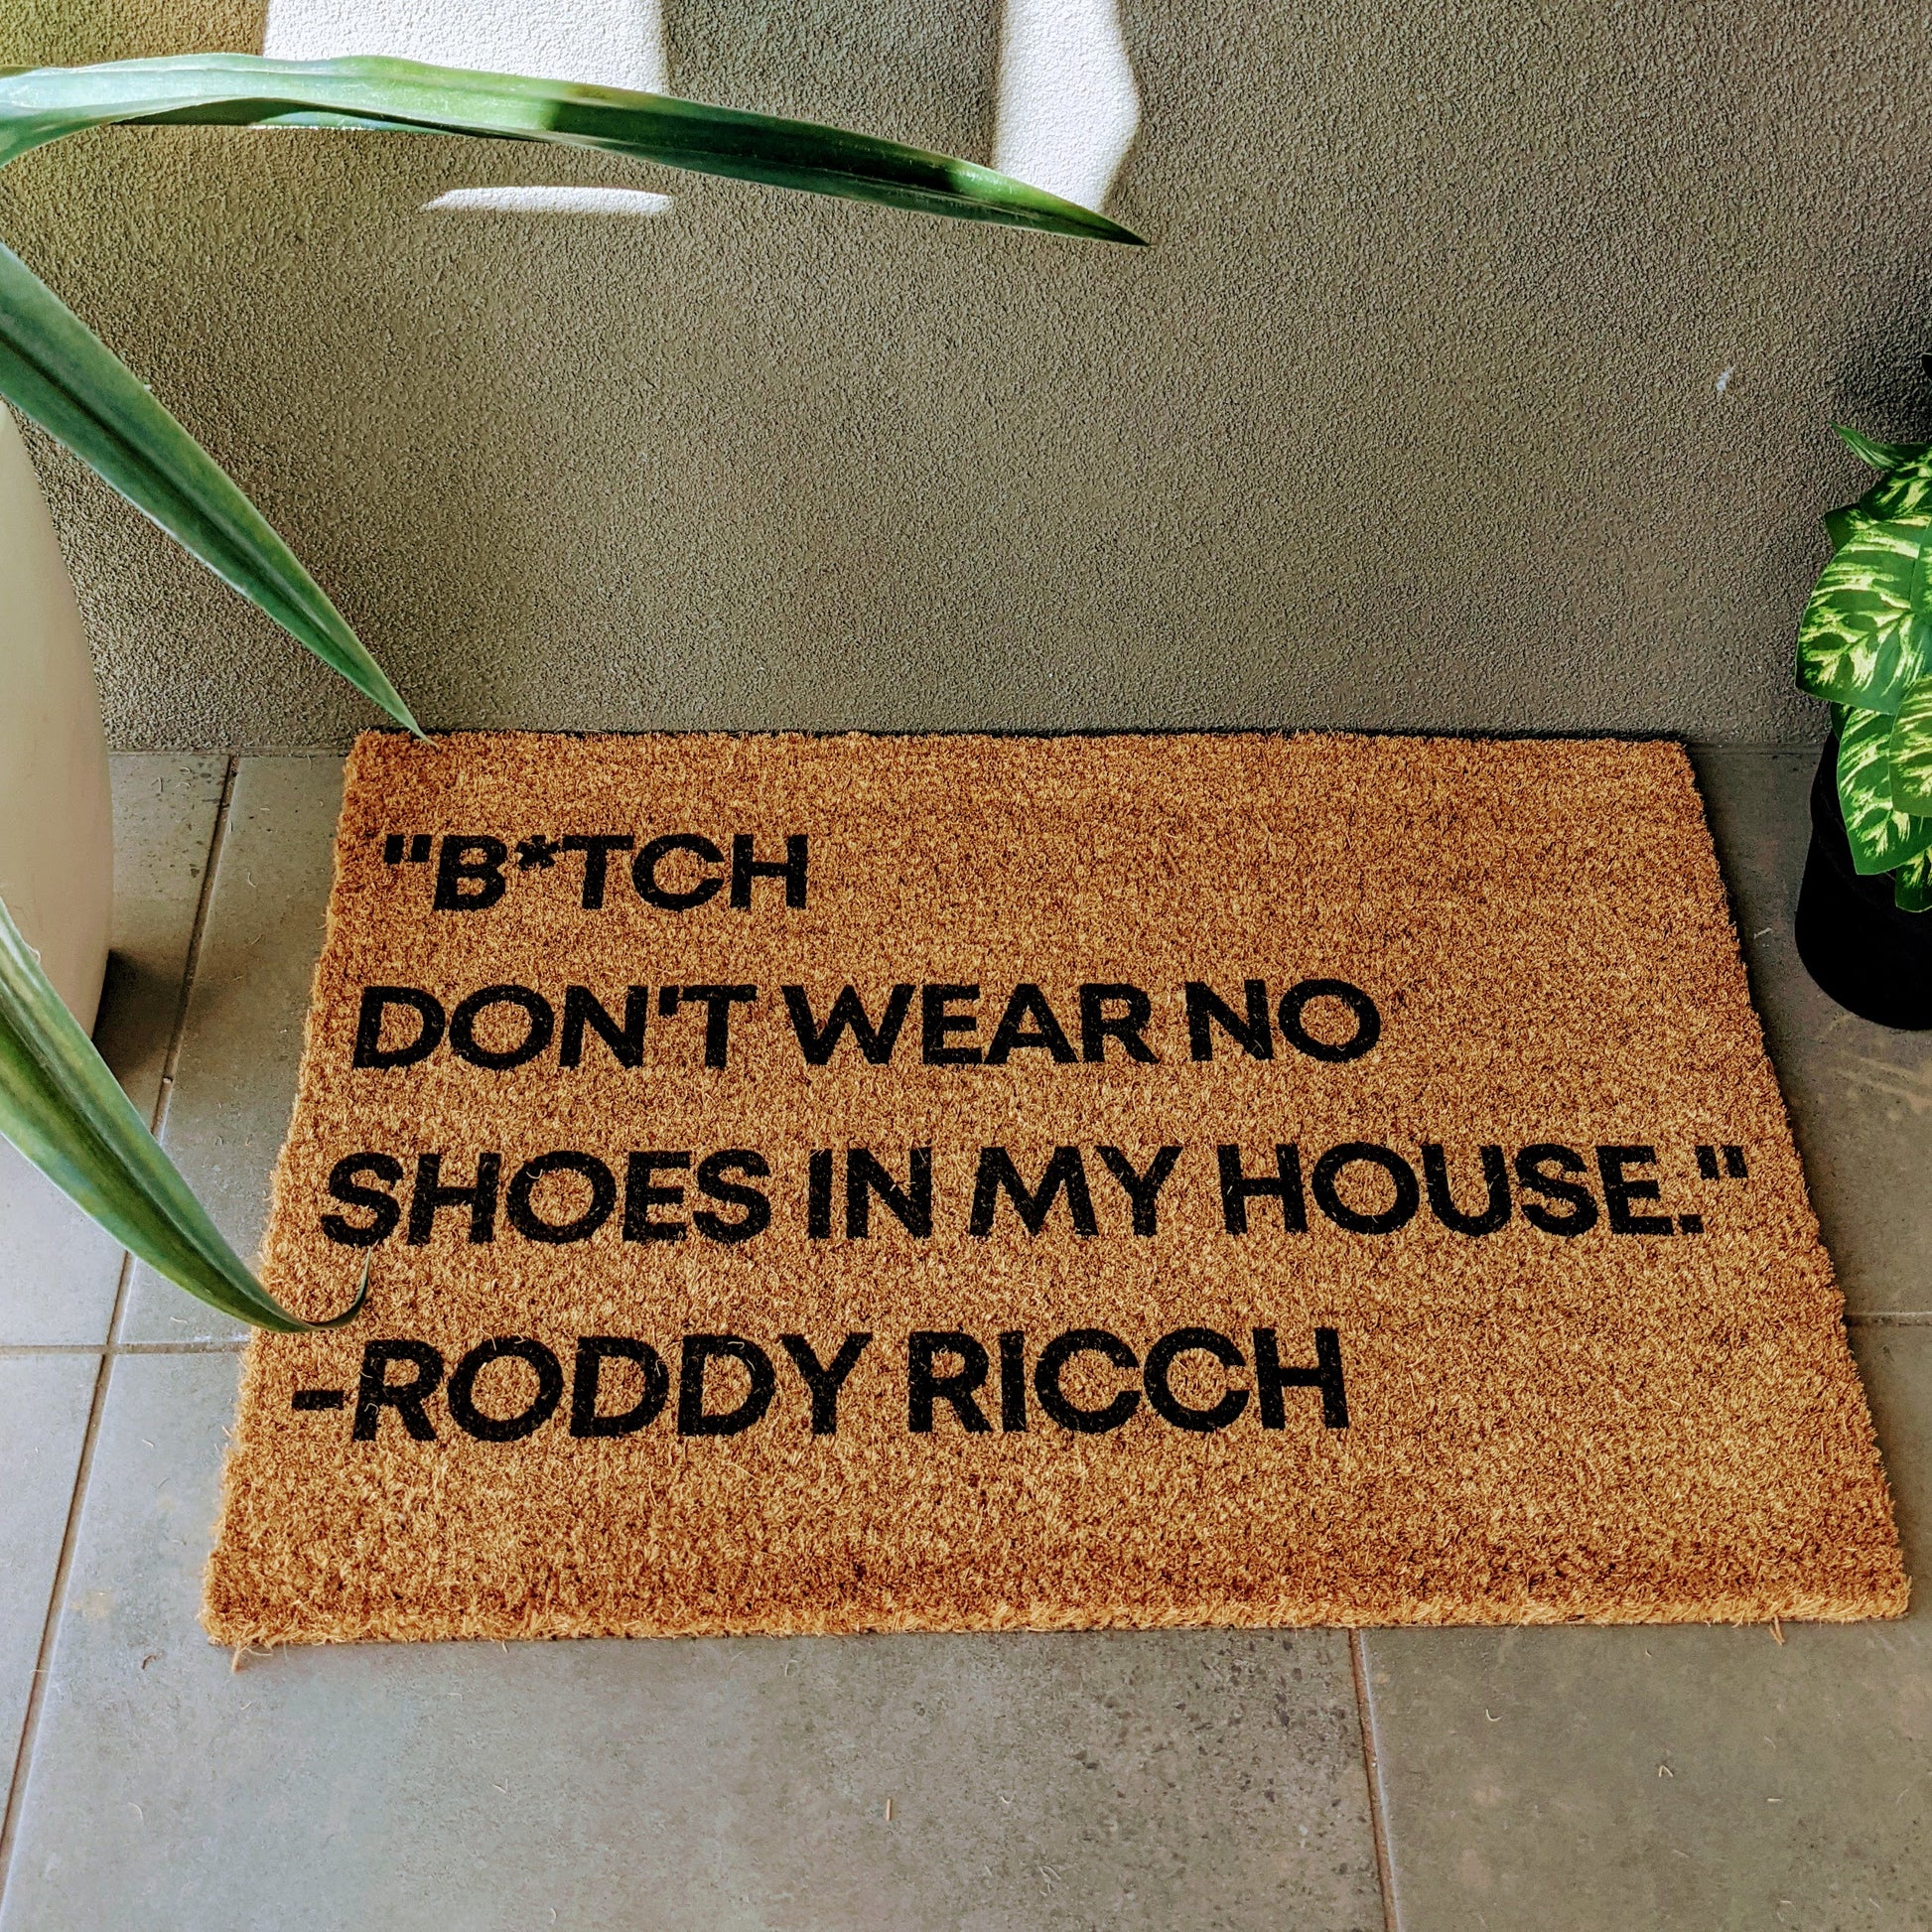 Bitch Dont wear no shoes in my house roddy ricch doormat